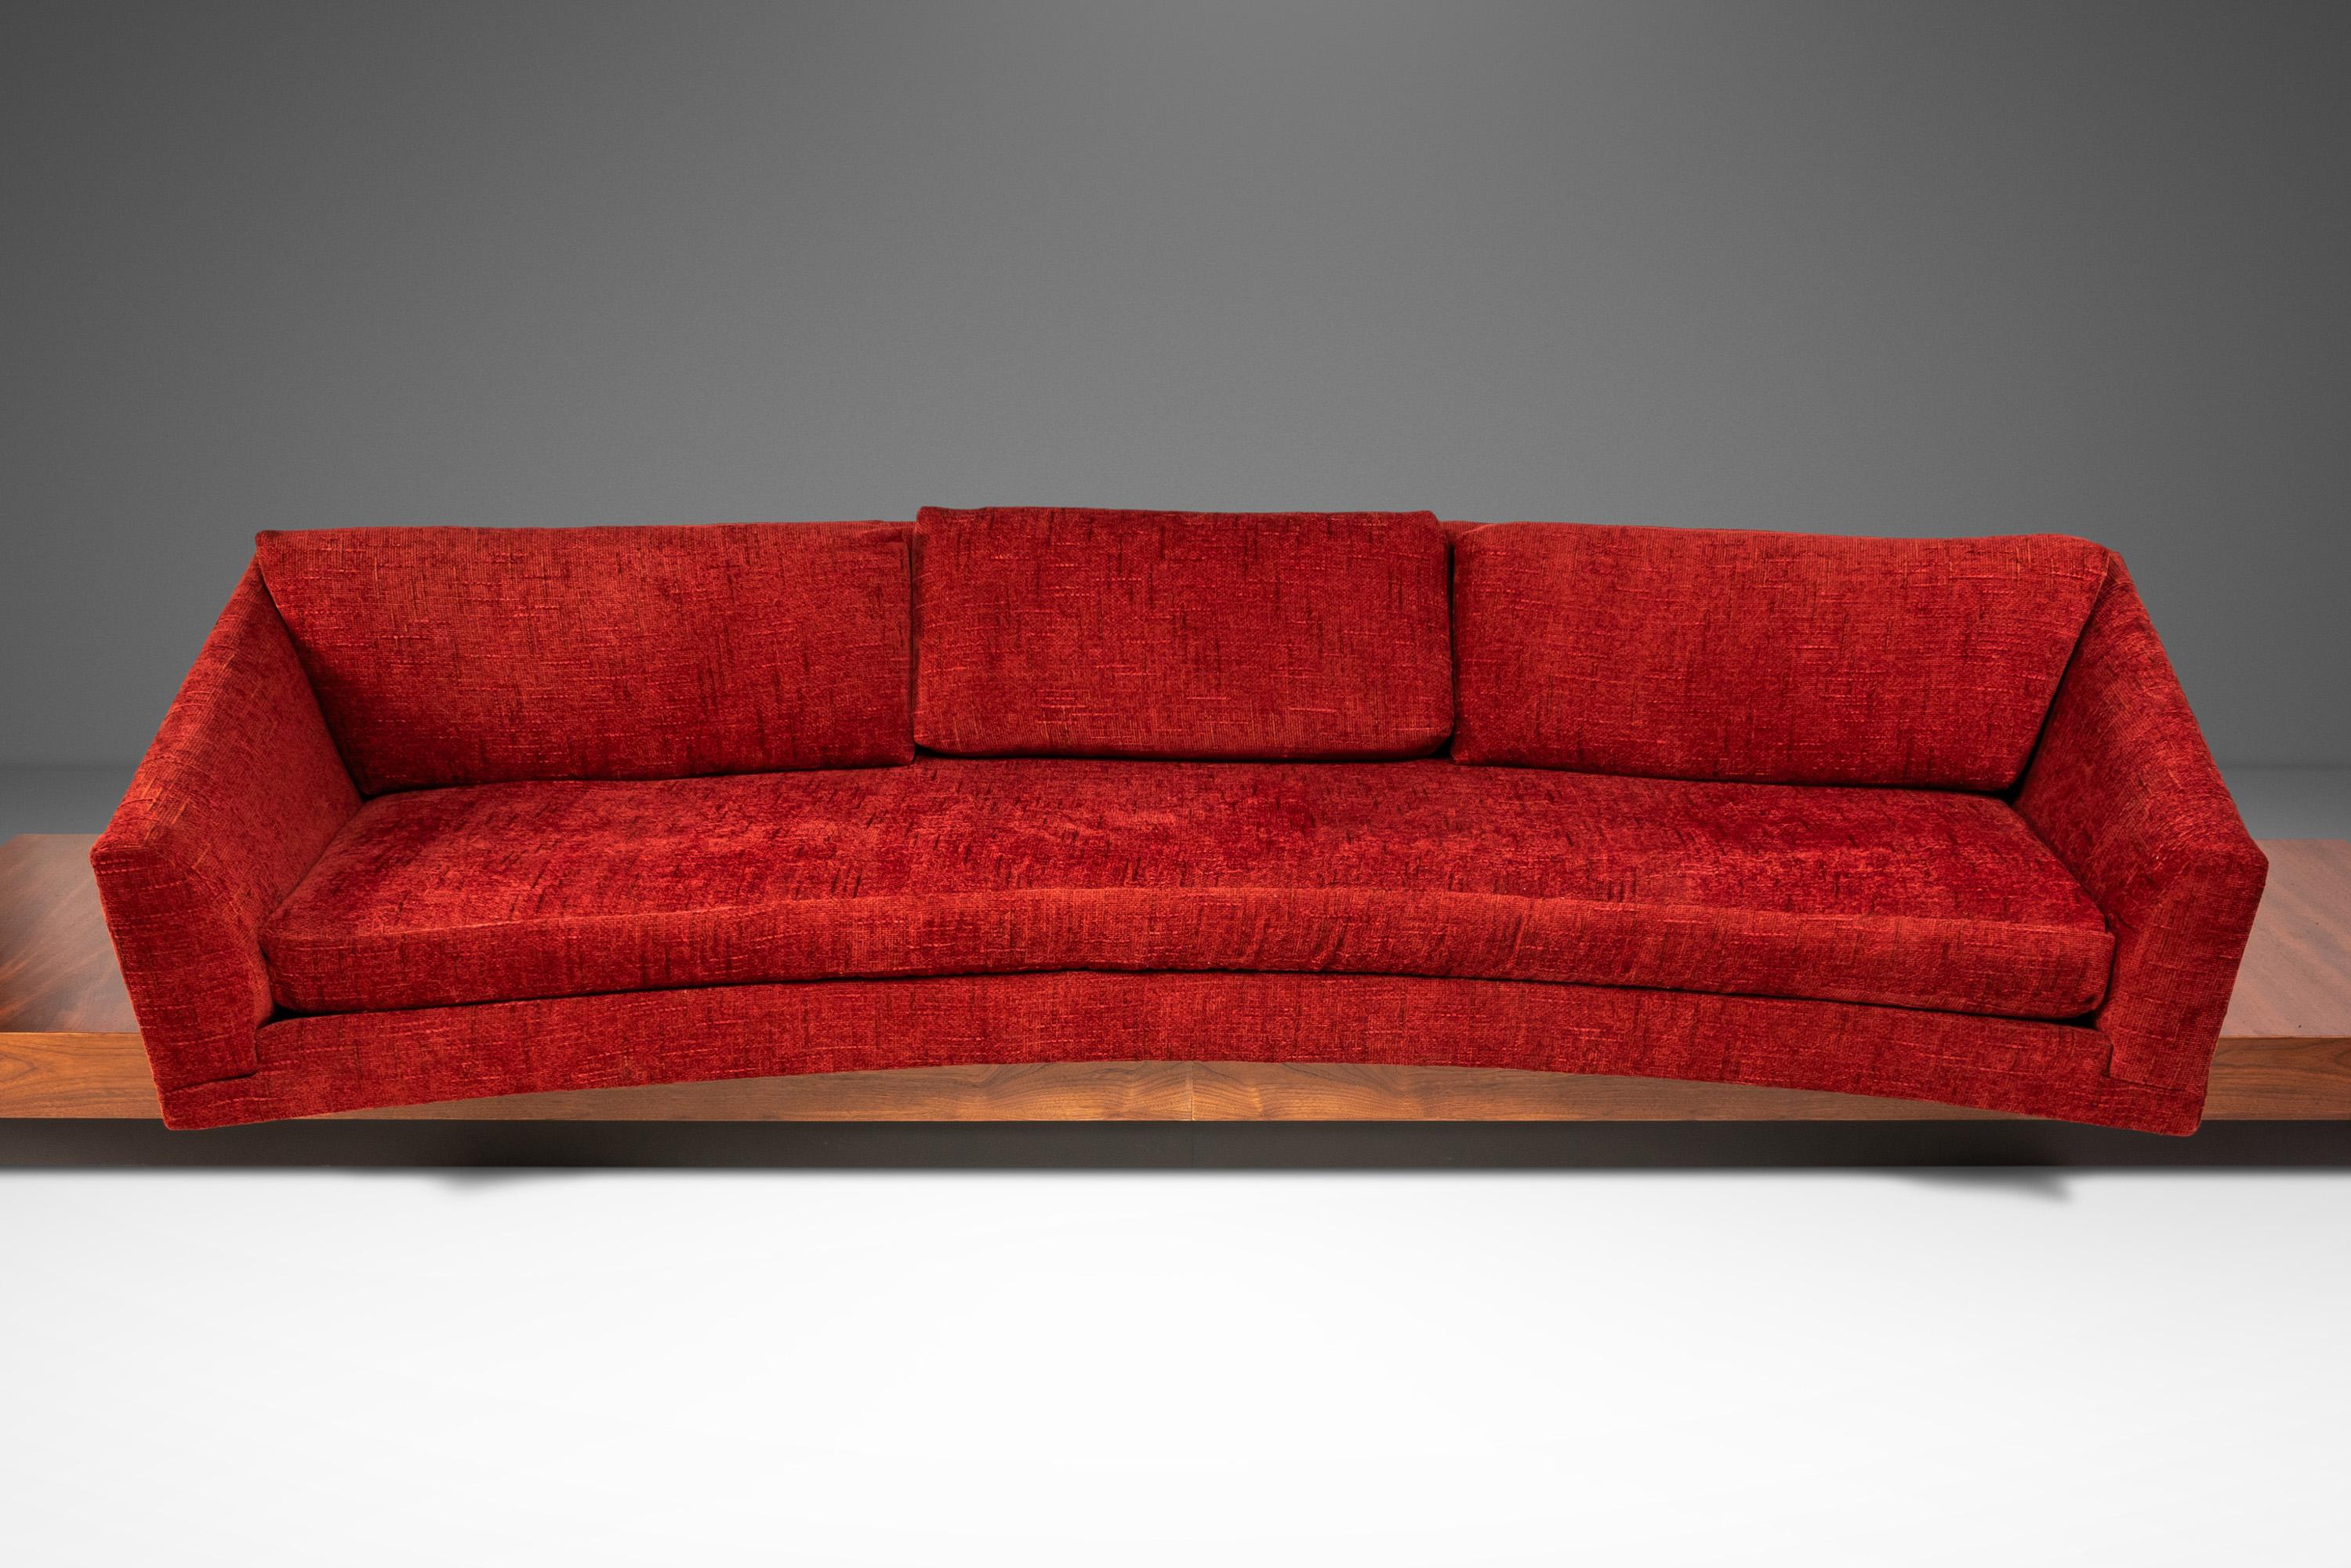 Expansive 12-Foot Platform Sofa by Adrian Pearsall for Craft Associates, 1960s For Sale 9